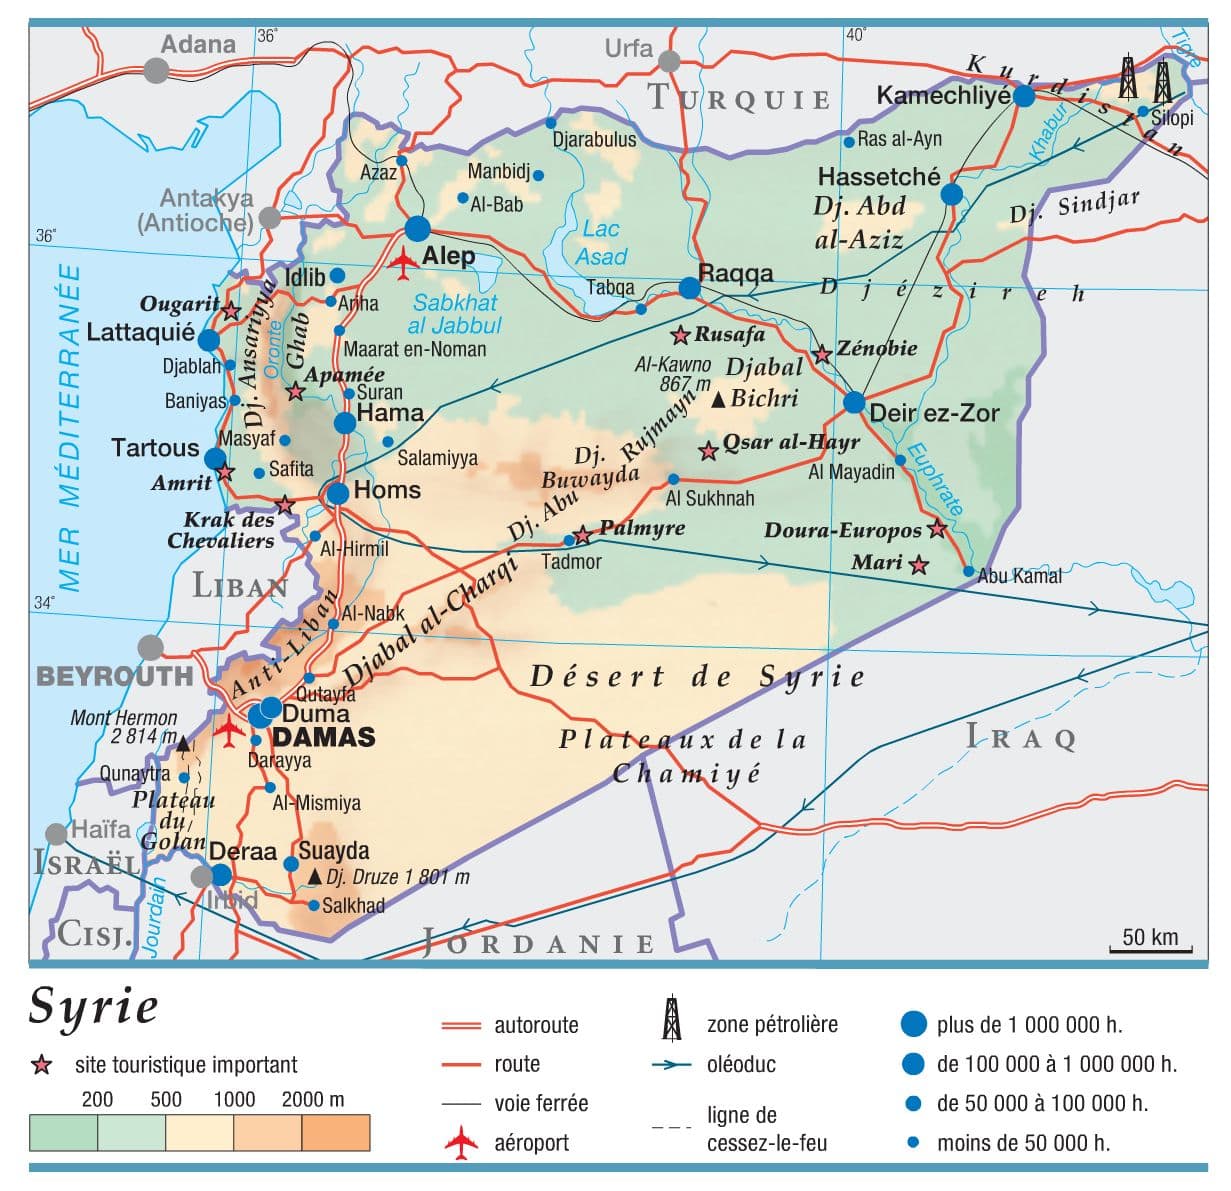 syrie geographie - Image